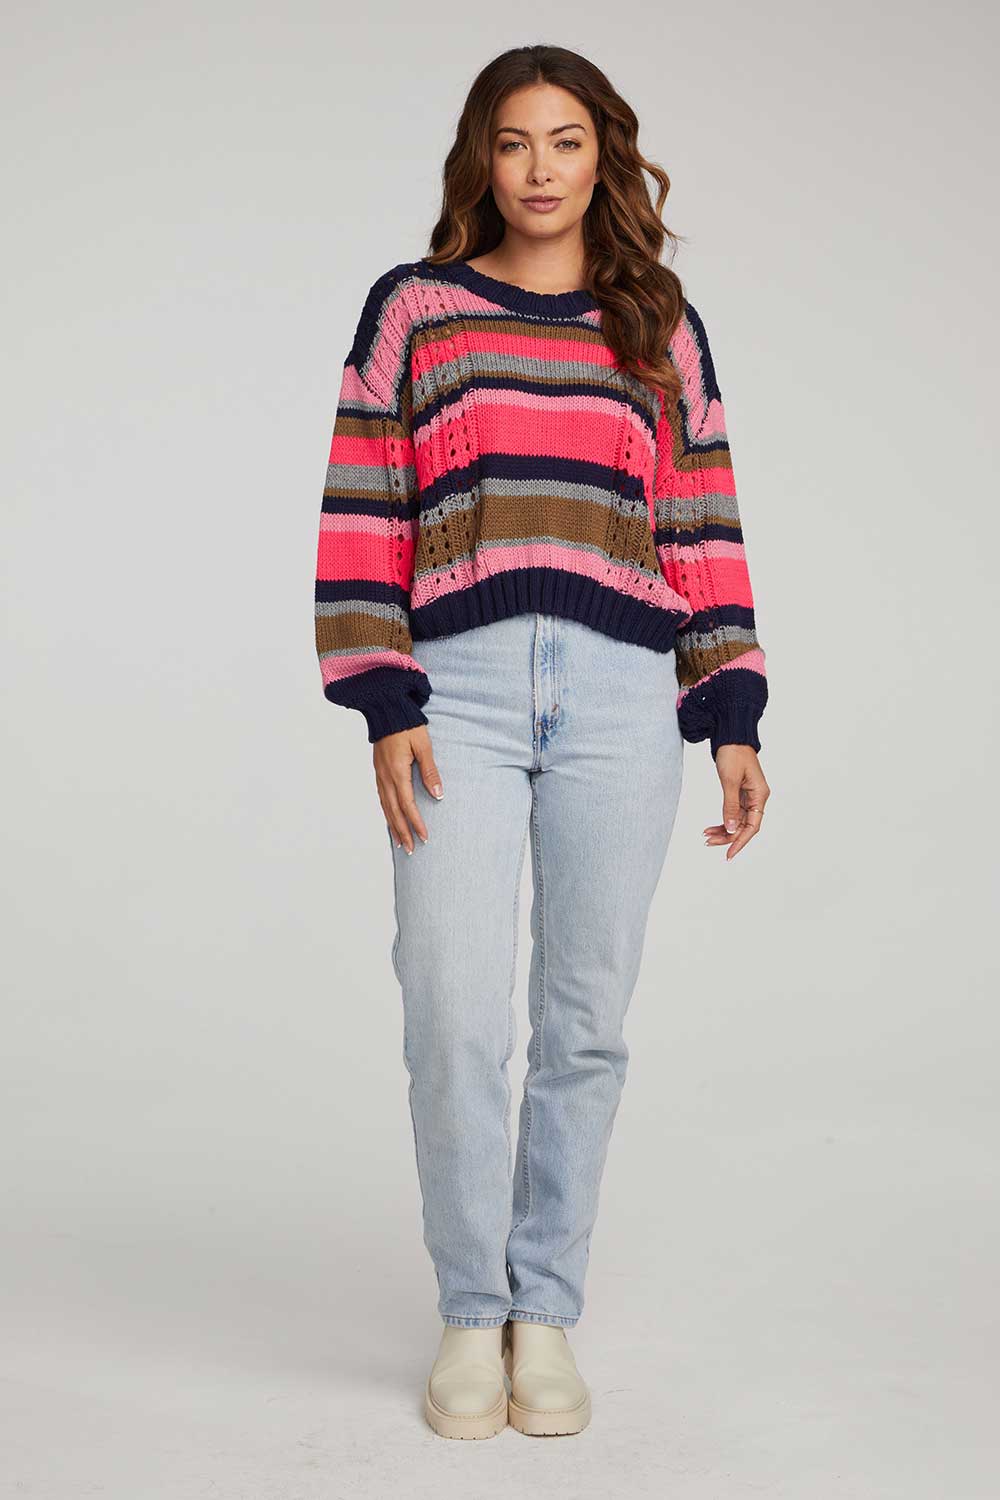 Saltwater Luxe - Mimi Sweater - Multi - Front